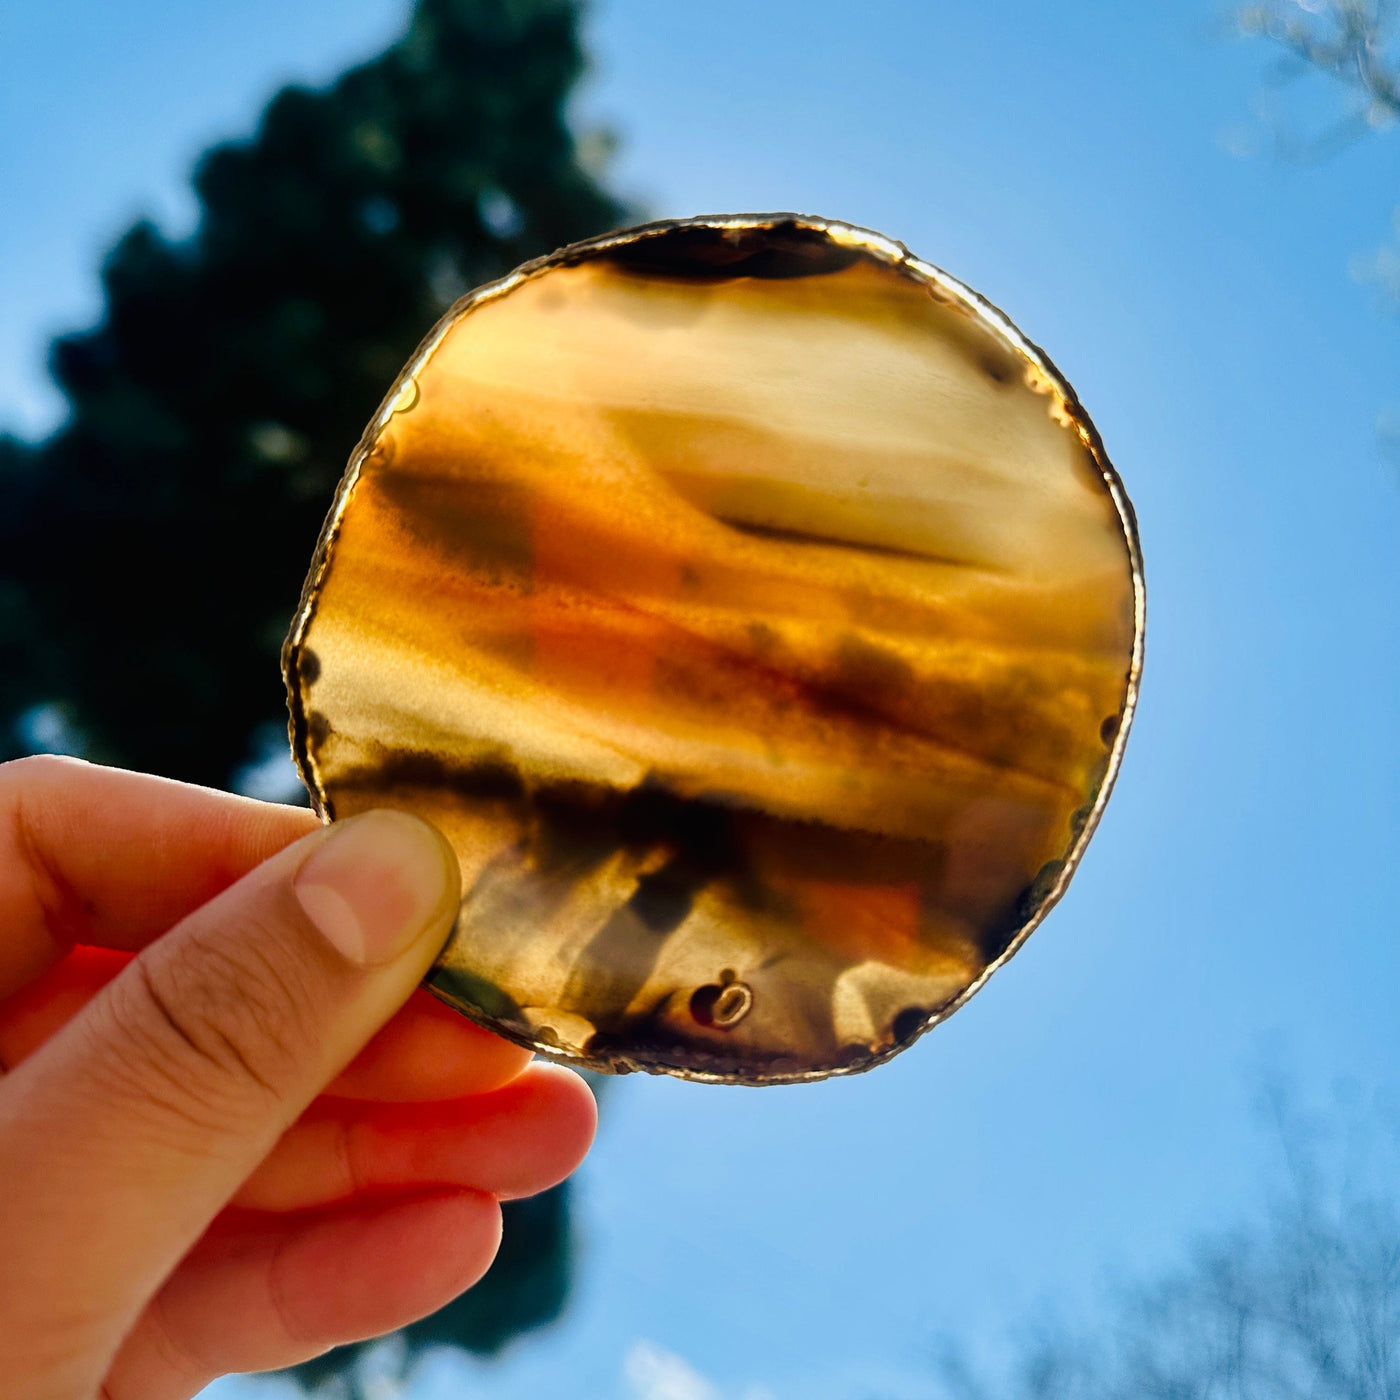  Agate Slice Set - Set of Two Agate Crystal Coasters agate 1 in hand in front of sun backlit